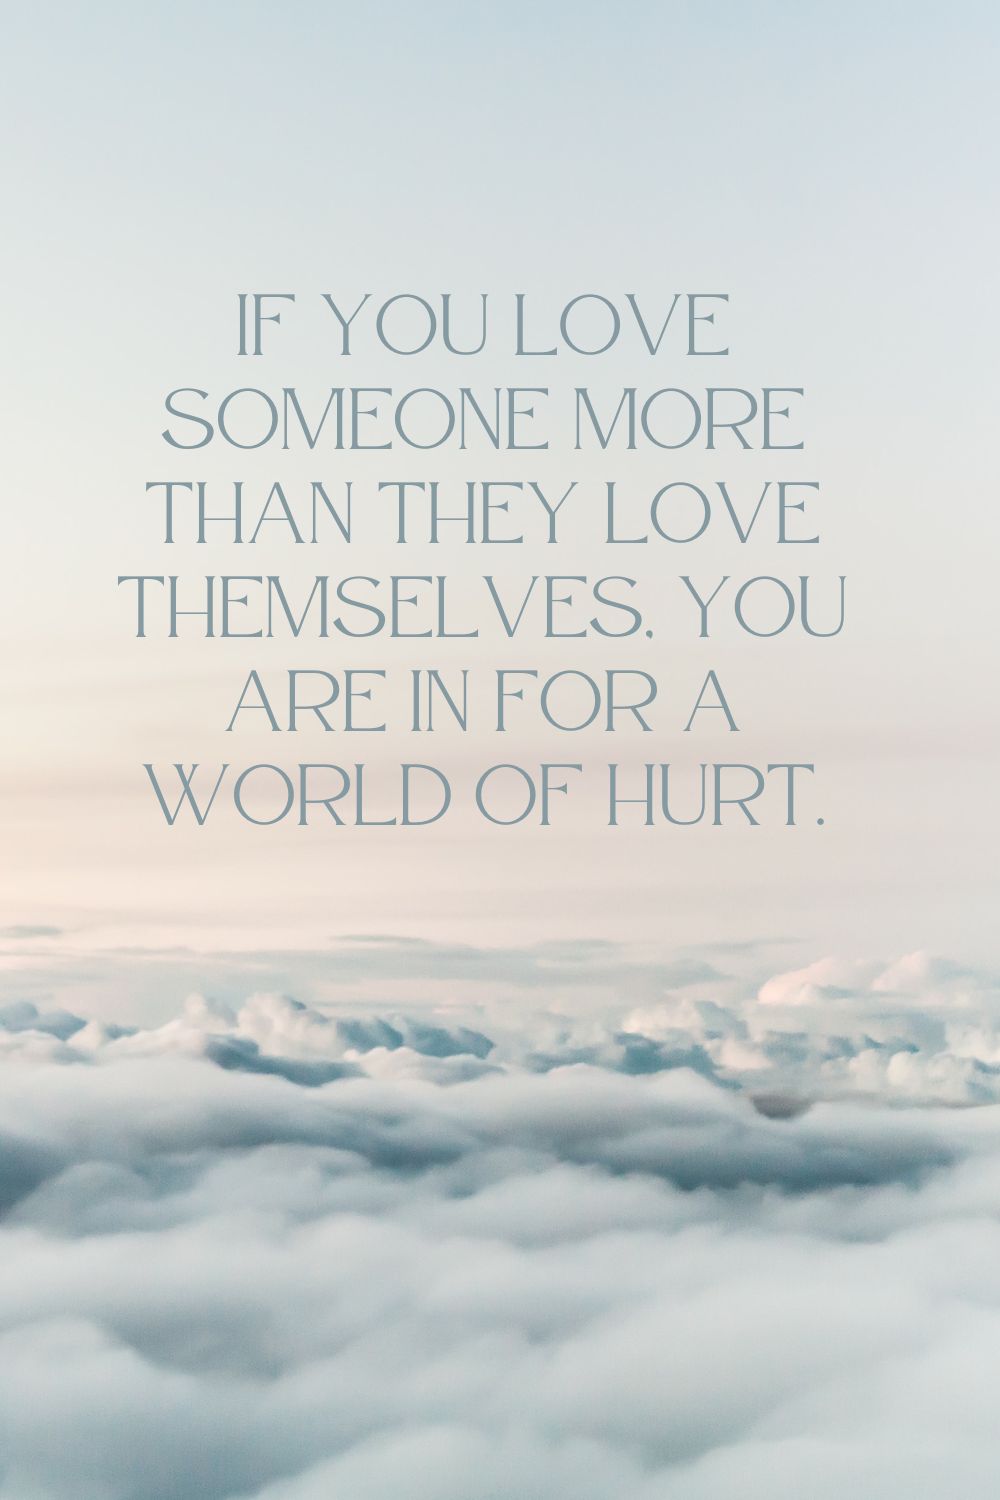 if you love someone more than they love themselves, you are in for a world of hurt.